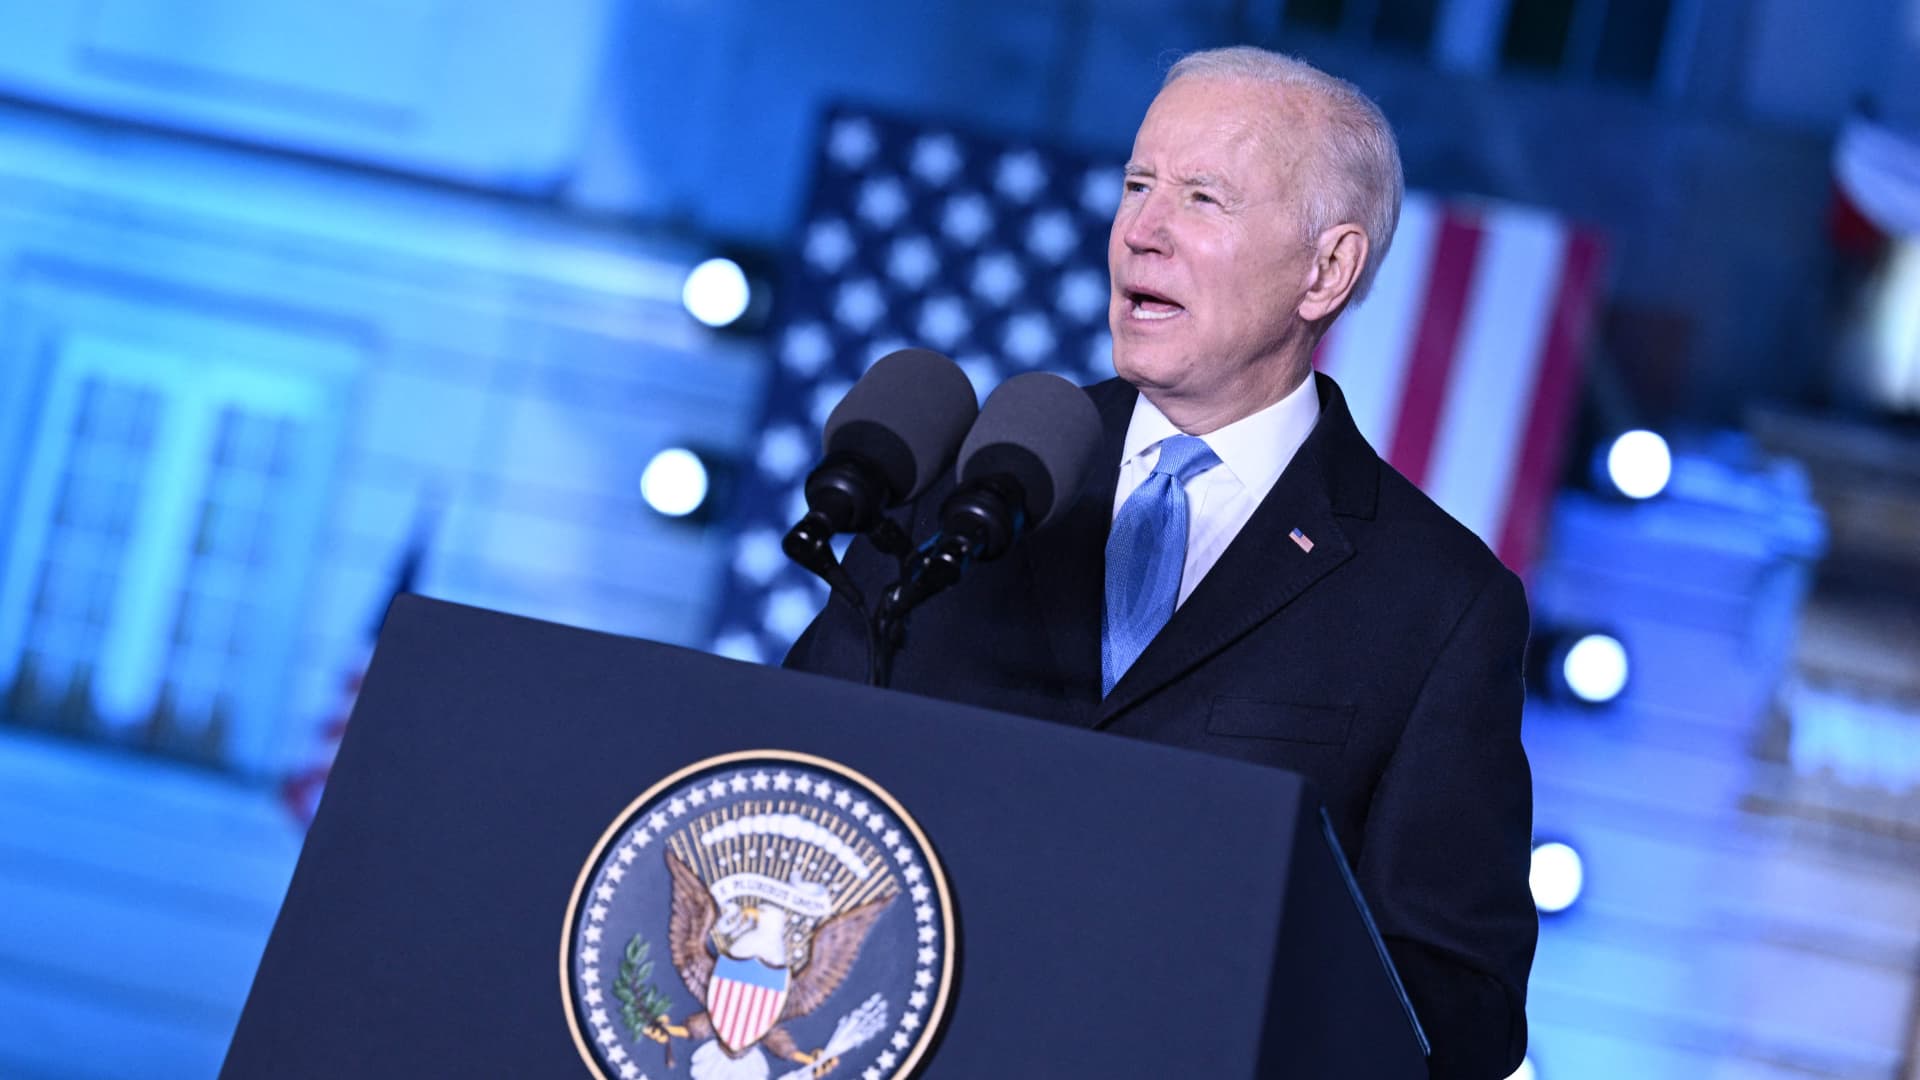 Biden’s approval falls to new low amid economic pessimism, inflation woes, CNBC ..